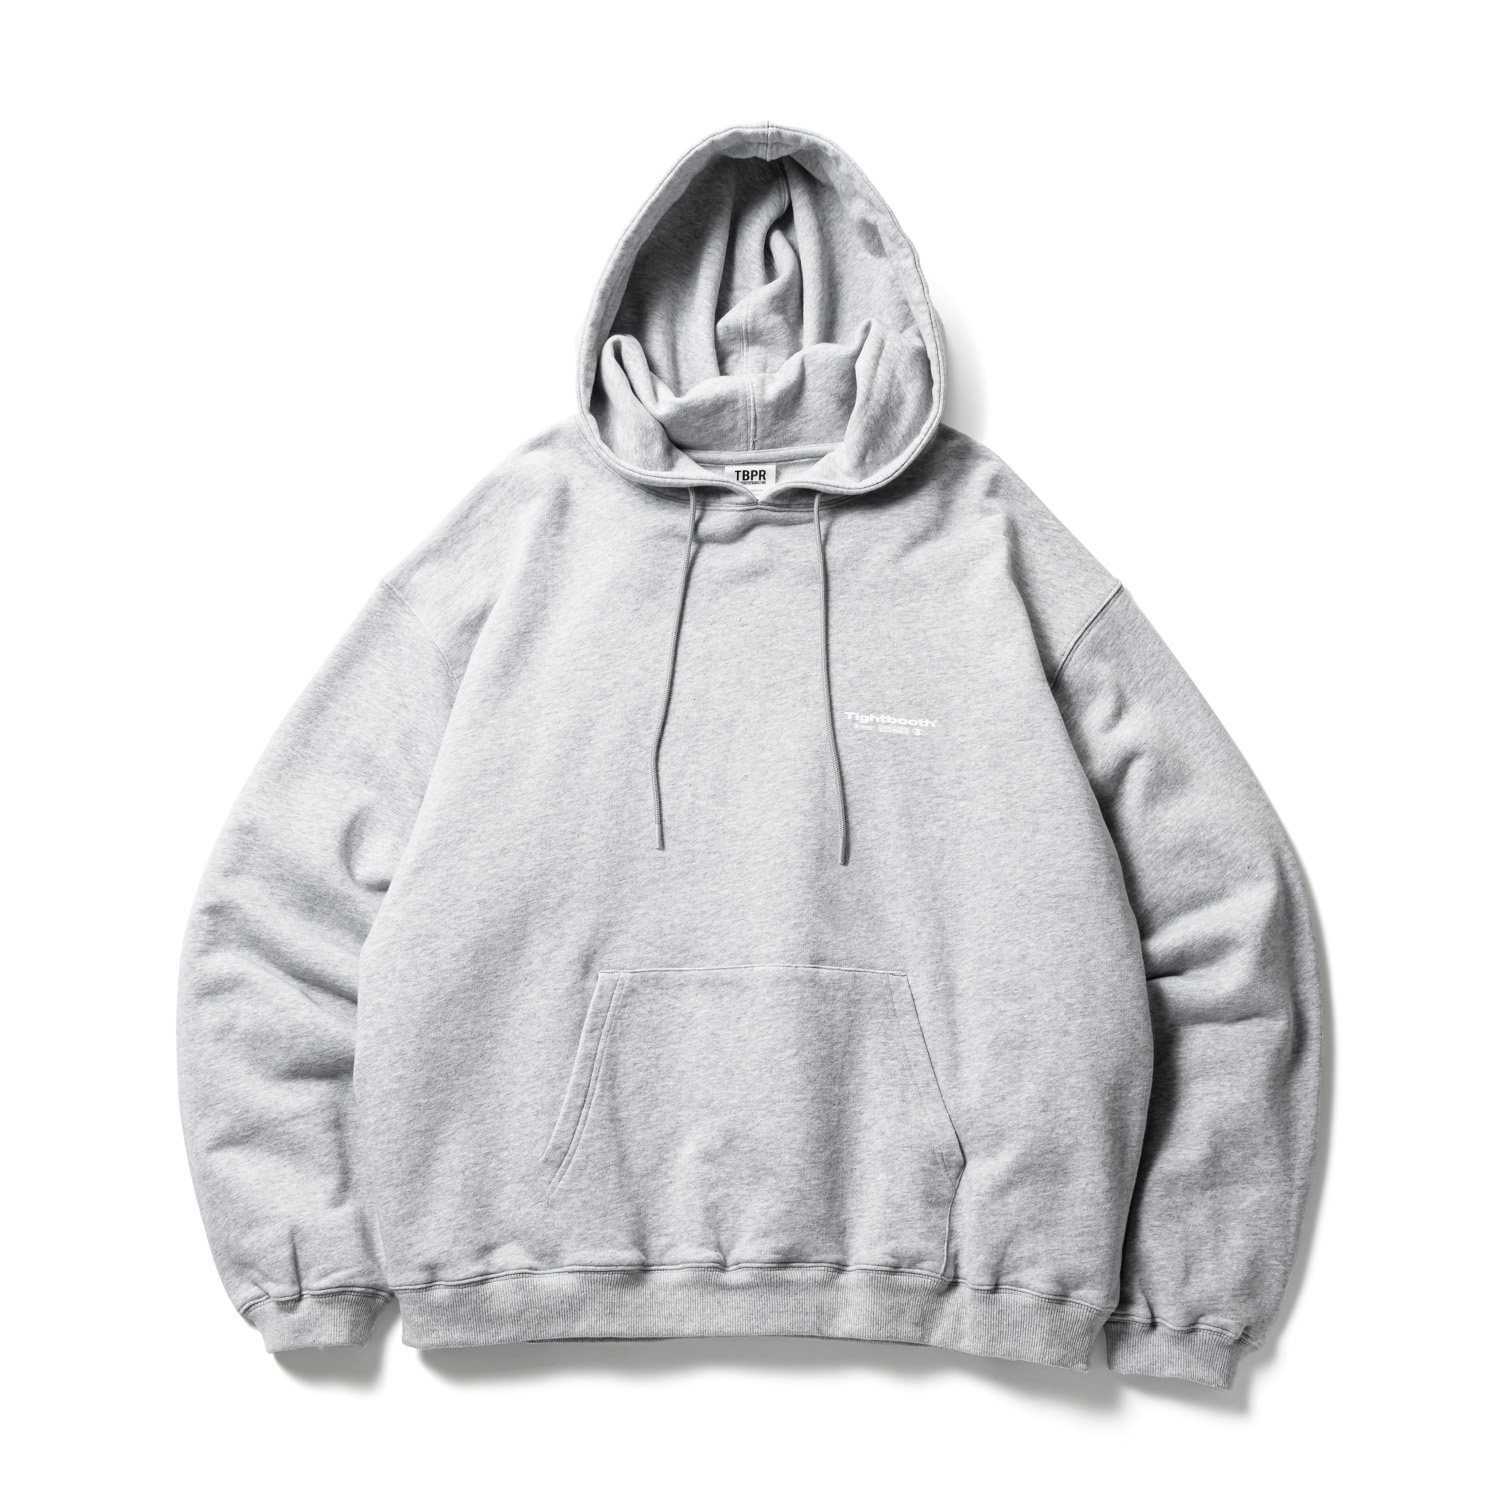 TIGHTBOOTH SMOOTH LAYERED HOODIE パーカー